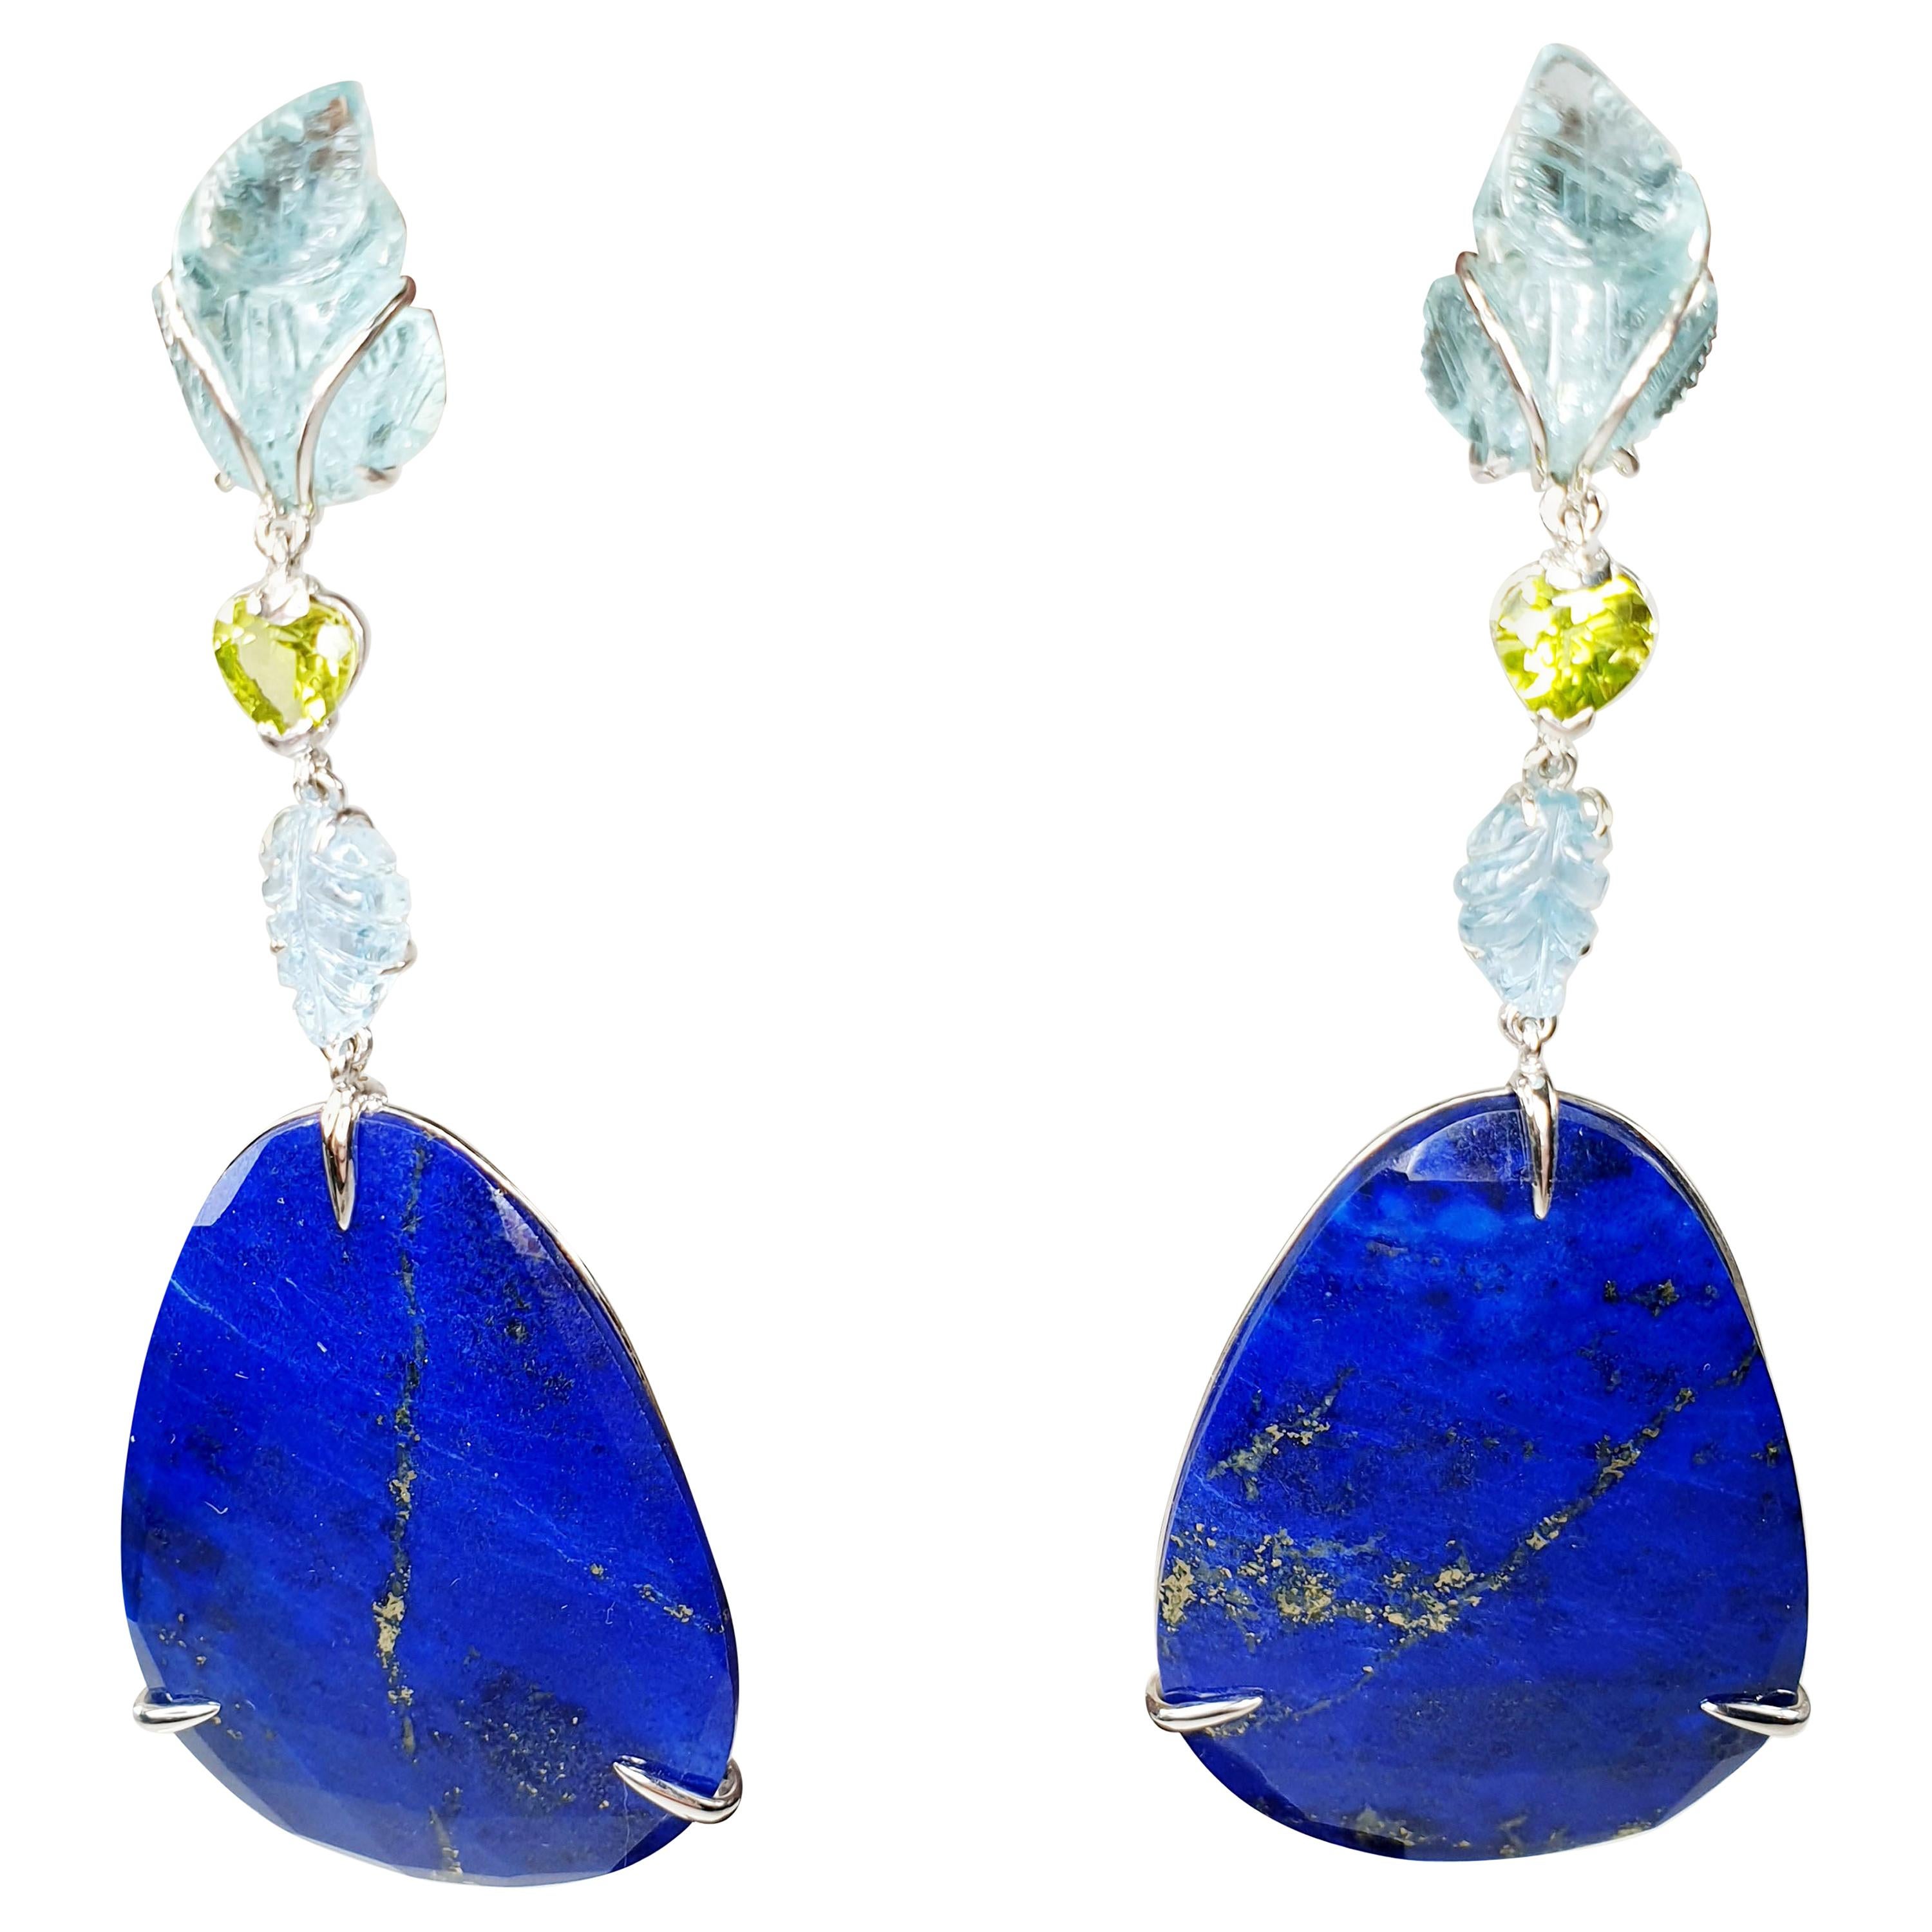 Carved Leafs Aquamarines Peridot in 18k Gold Earrings with Lapis Lazuli Drops For Sale